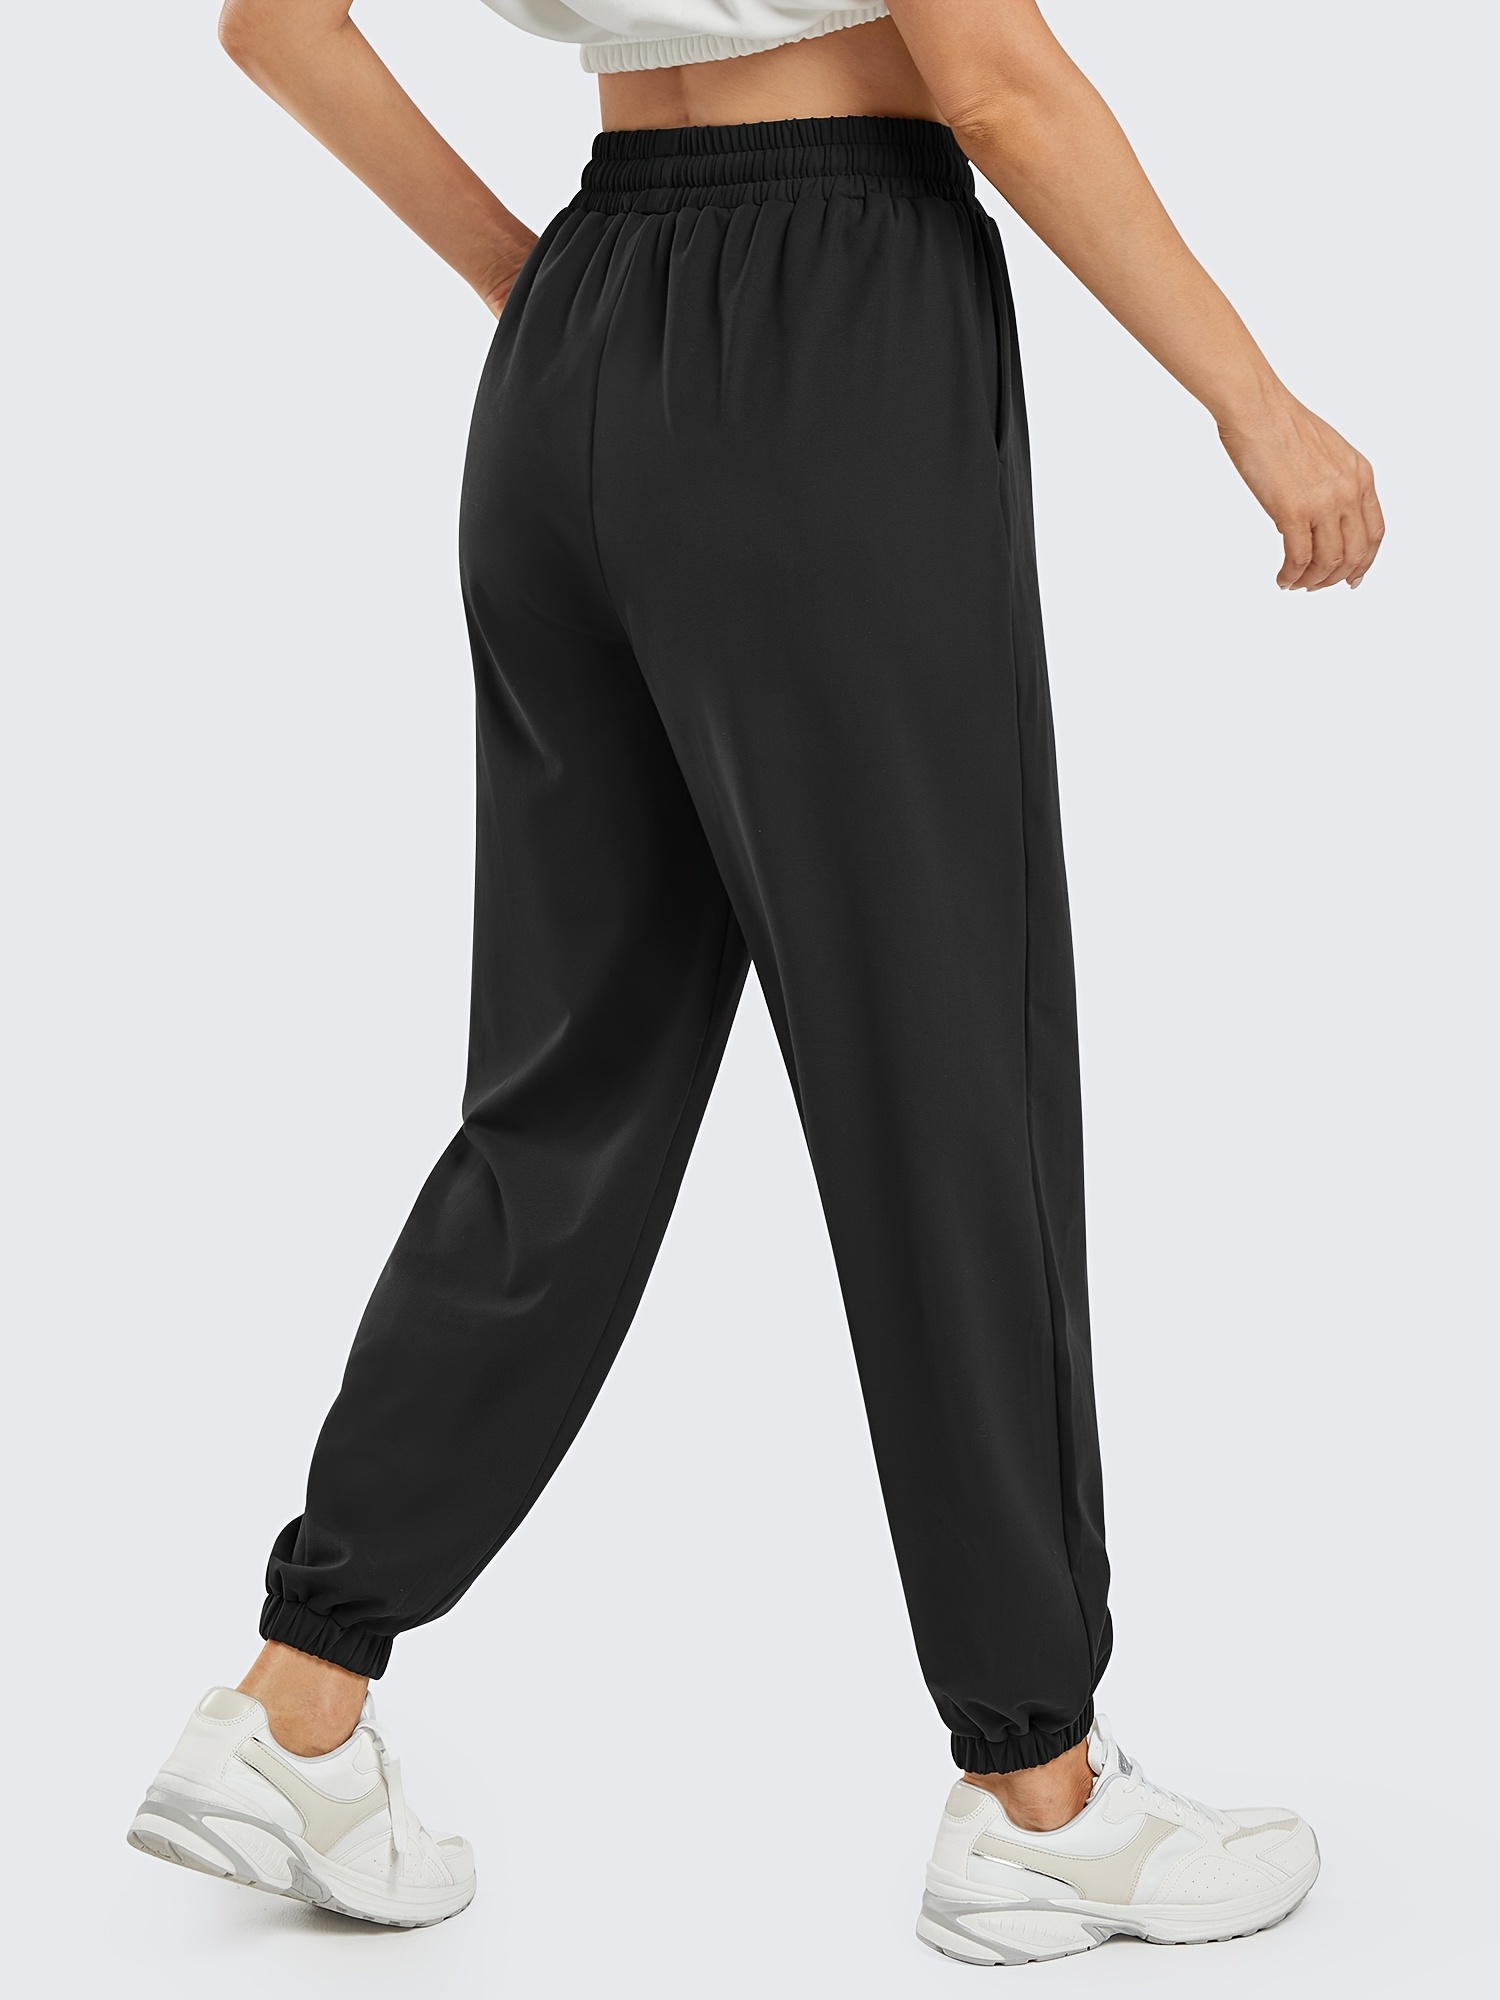 Women Breathable Closed Bottom Sweatpants with Pockets High Waist Workout  Jogger Pants Casual Trousers